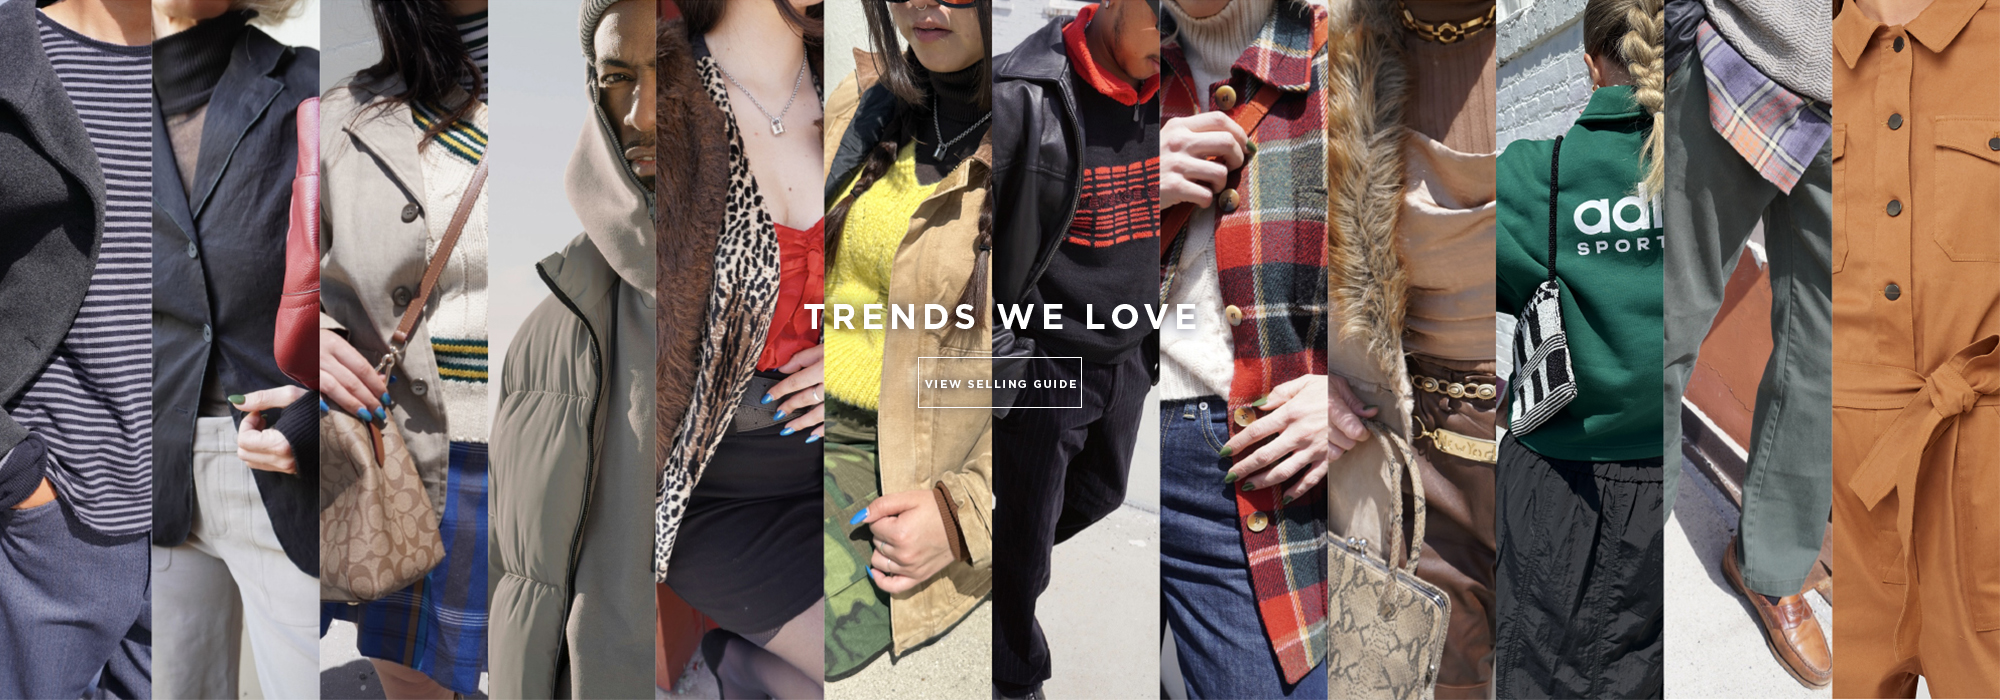 Fall fashion photo collage photo text reads trends we love view selling guide